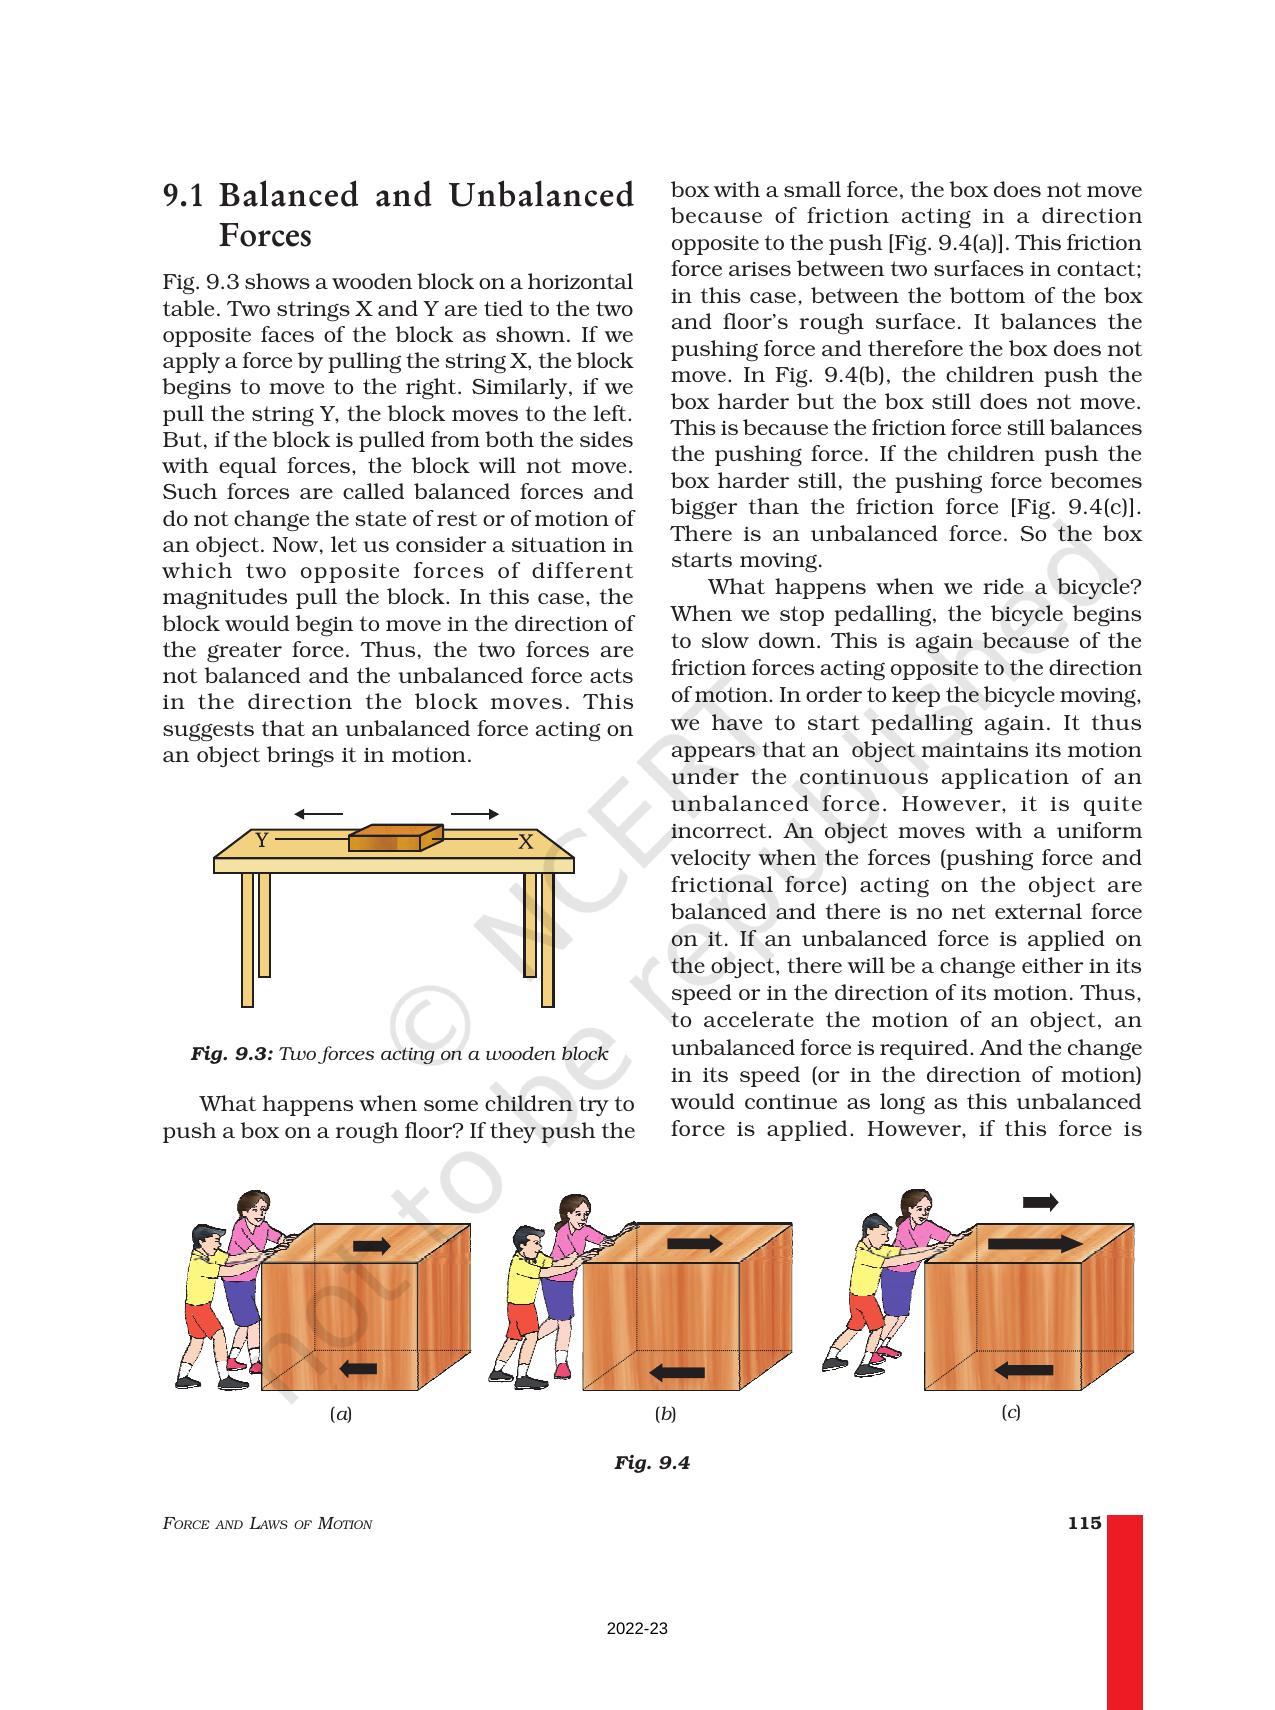 NCERT Book for Class 9 Science Chapter 9 Force And Laws Of Motion - Page 2